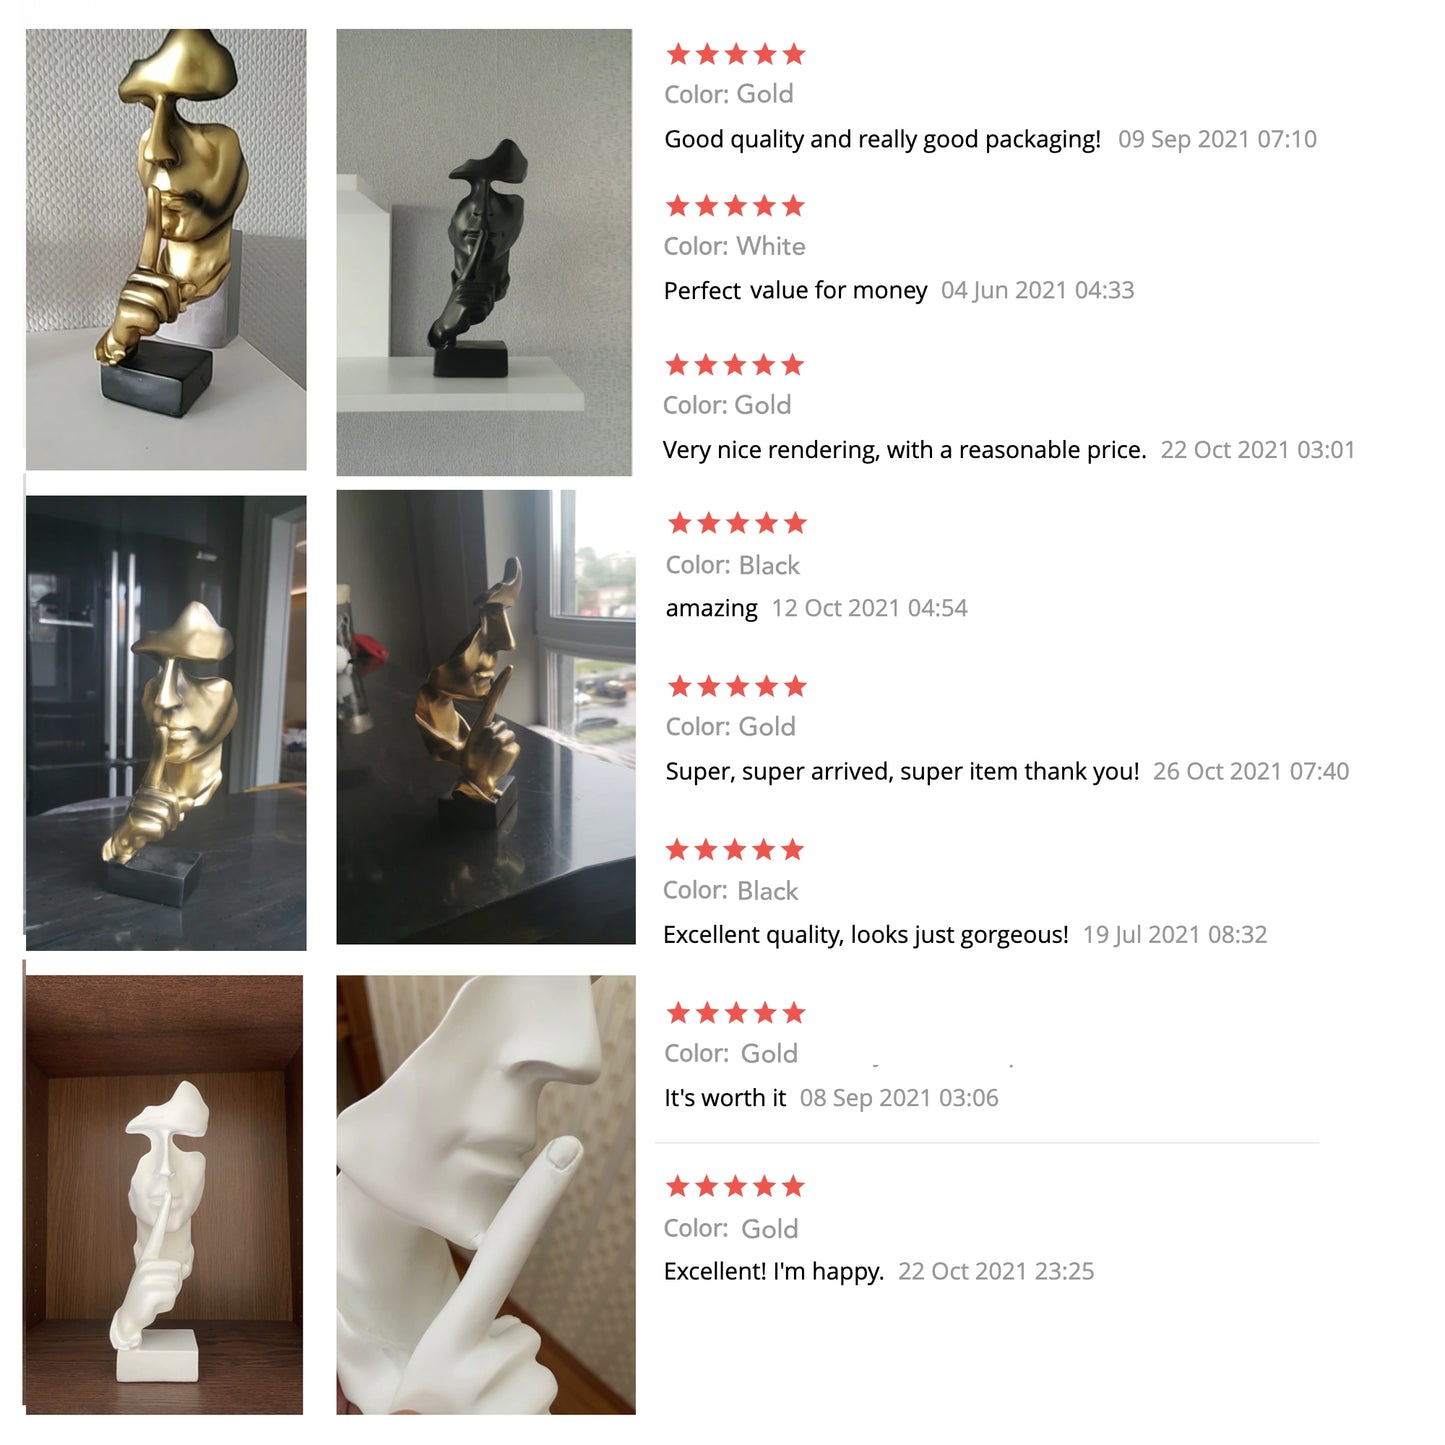 Gold Silence Statues